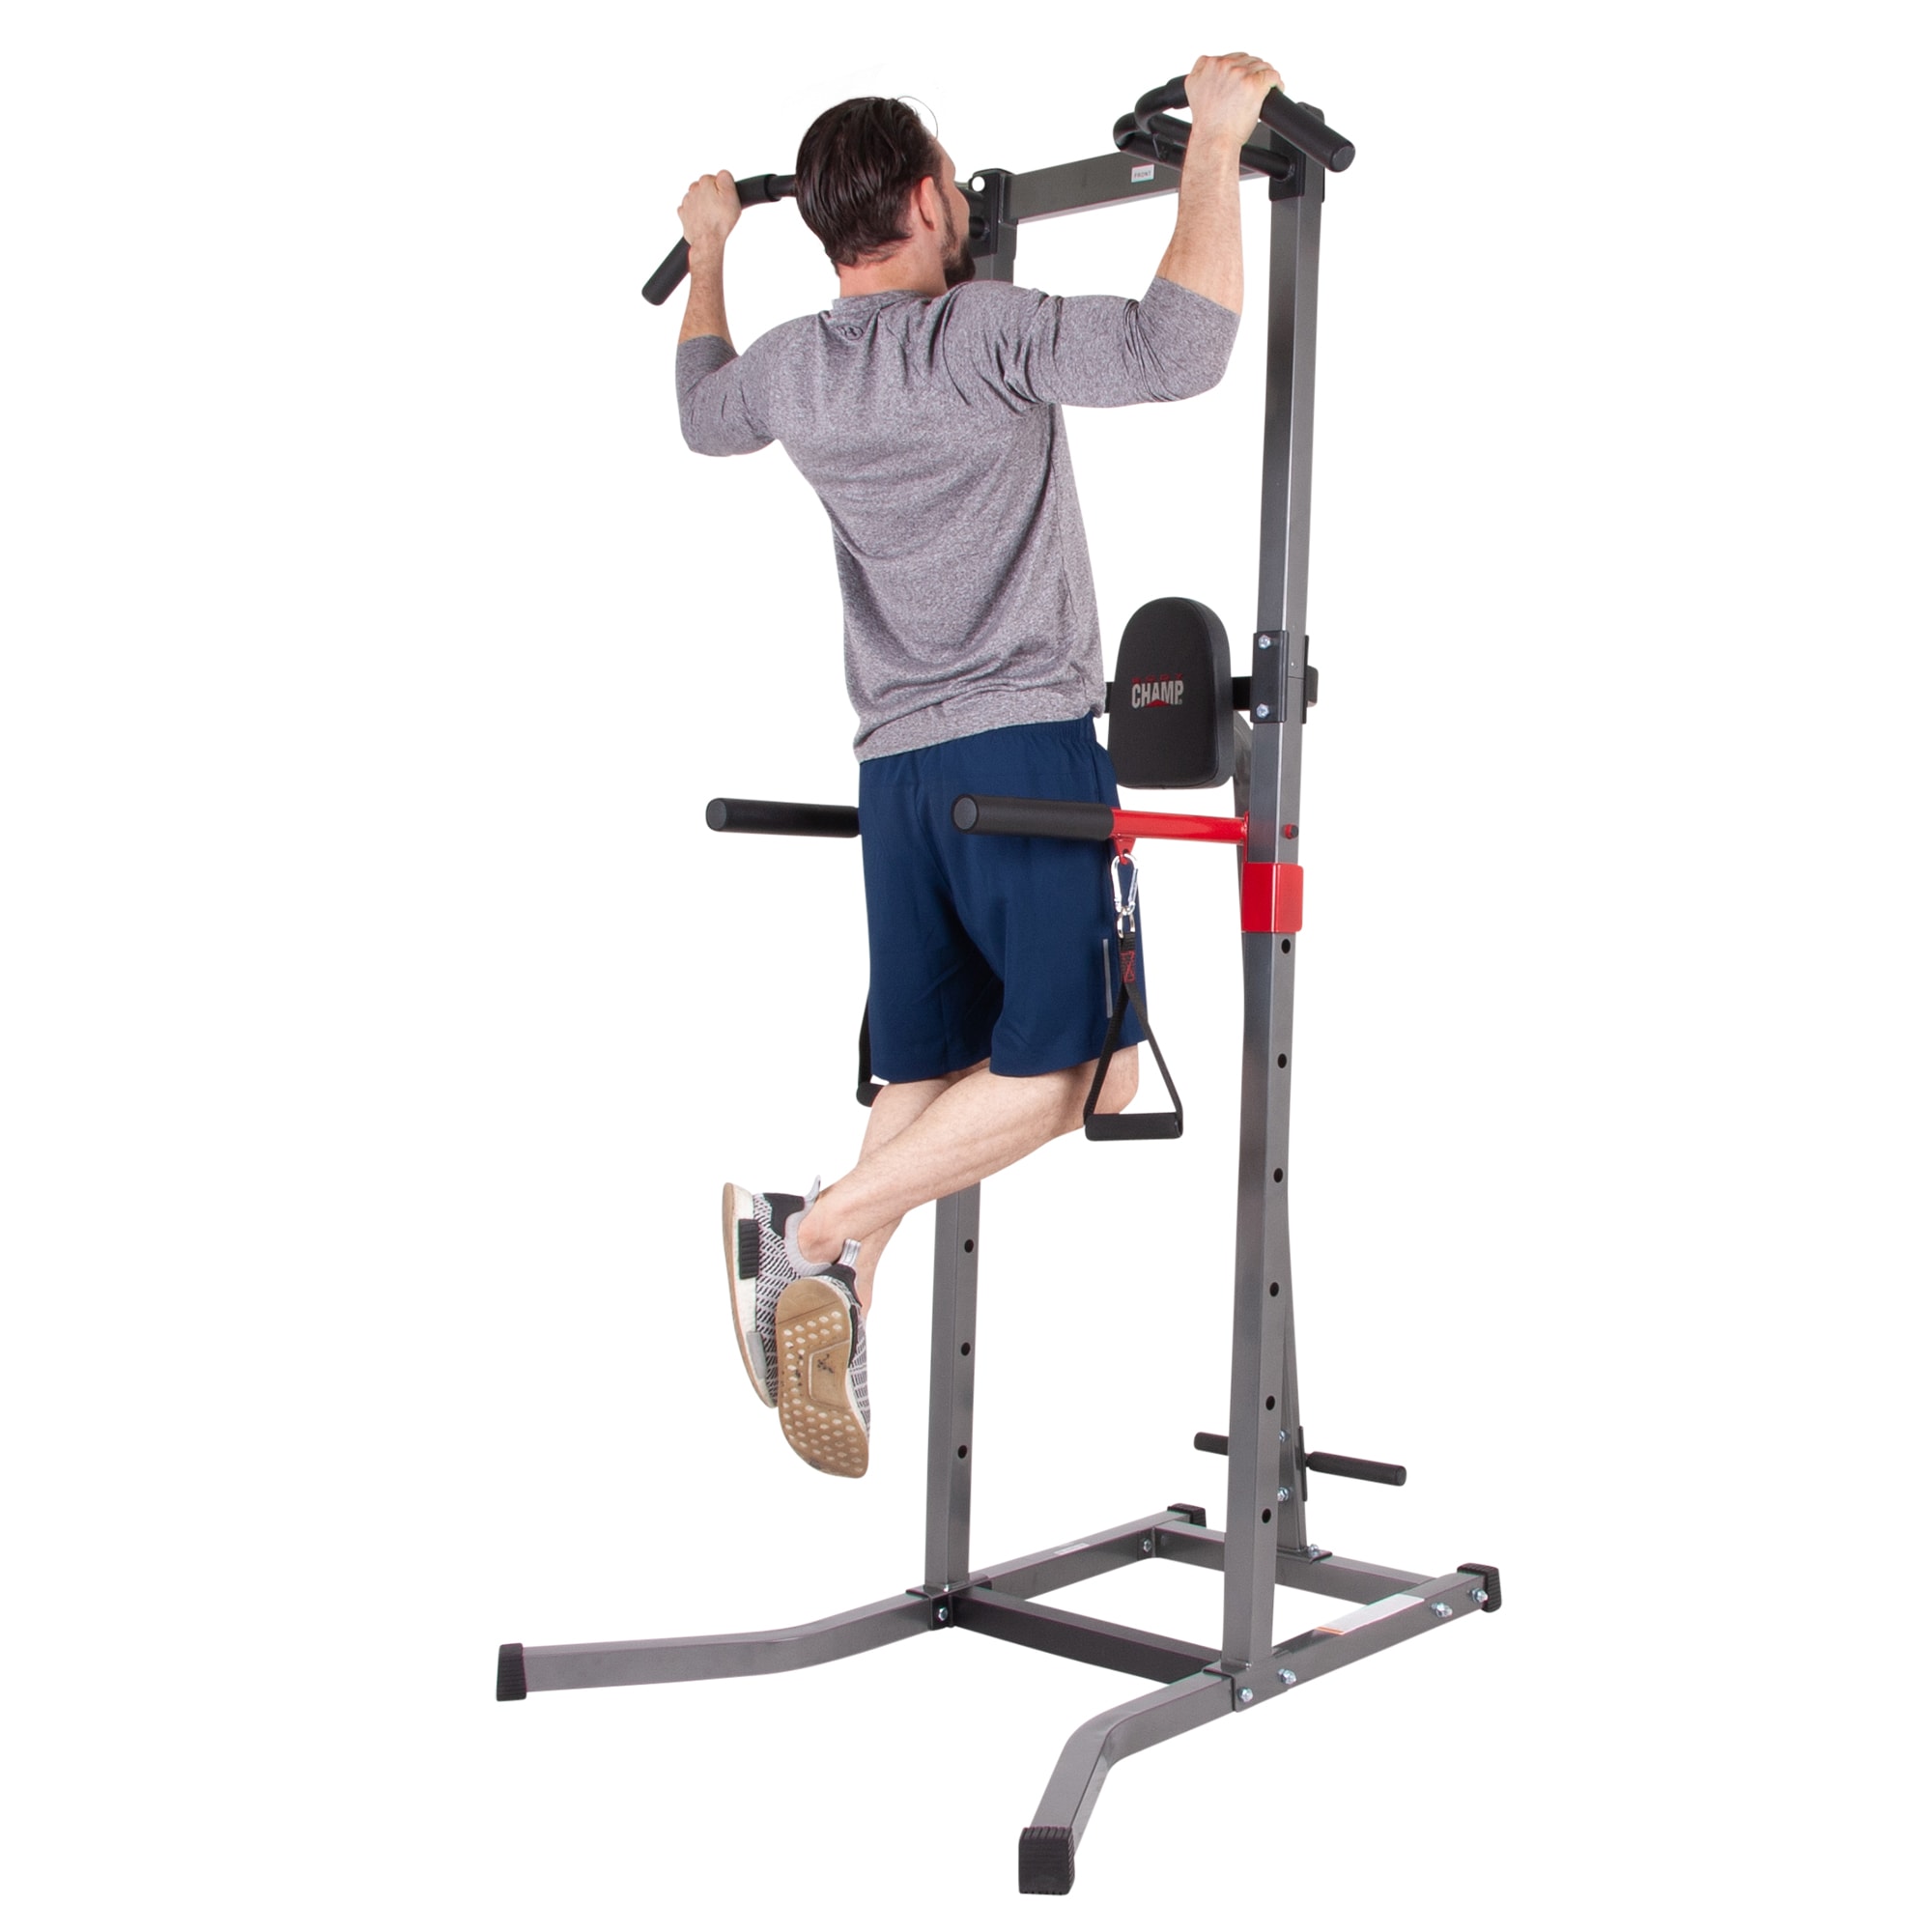 Muscle Power Crossfit Pull Up Bar (indoor)